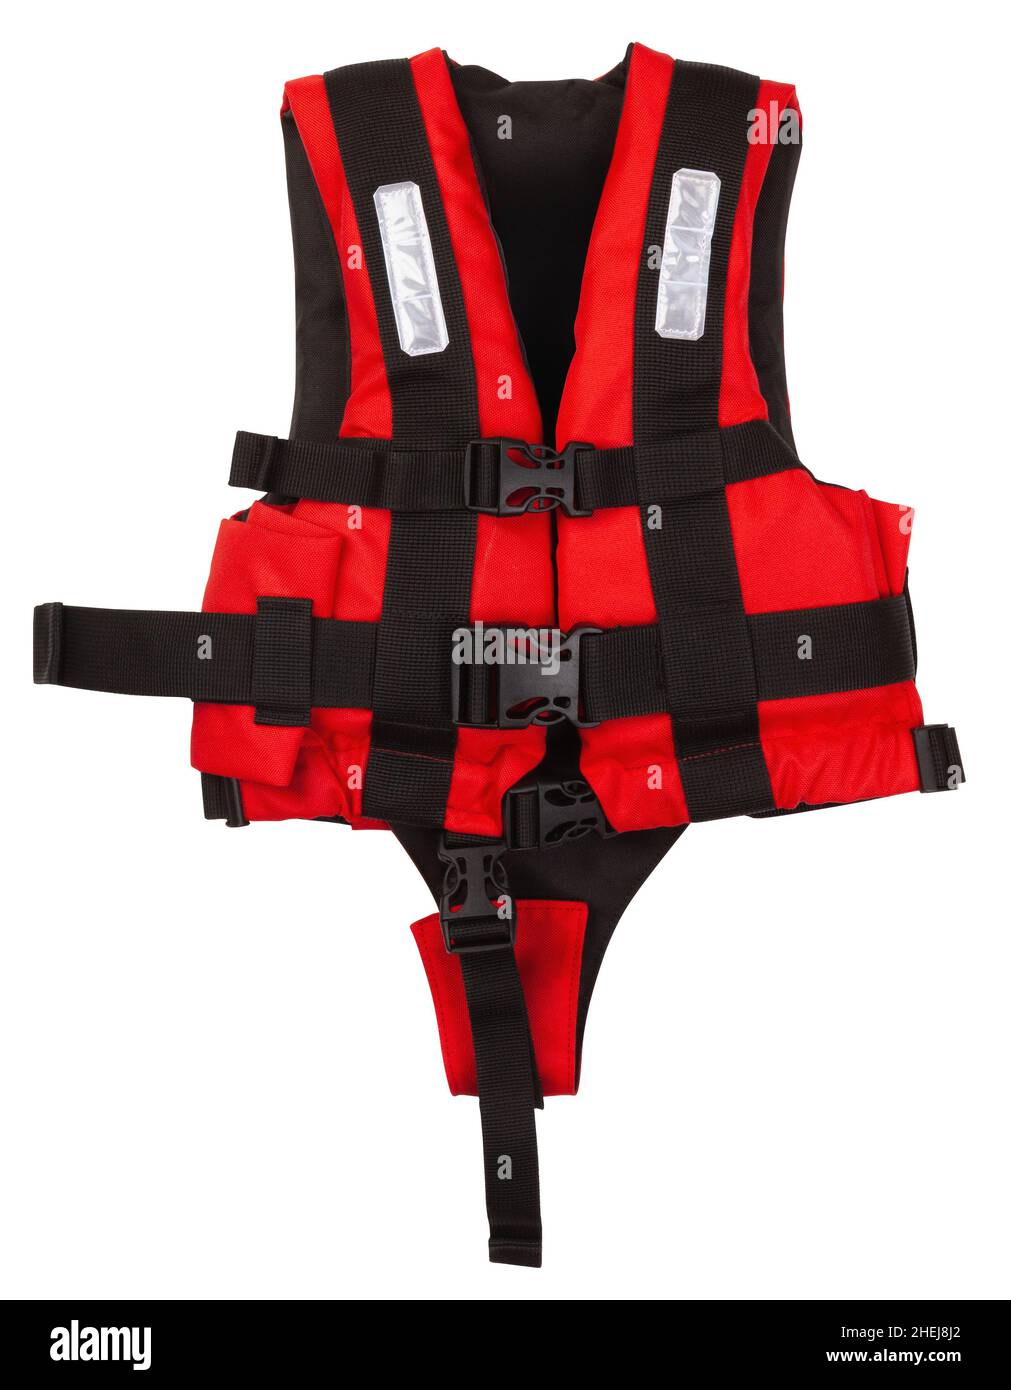 Life Jacket Vests For The Entire FamilyWith WhistleYouth XXL US Adult 